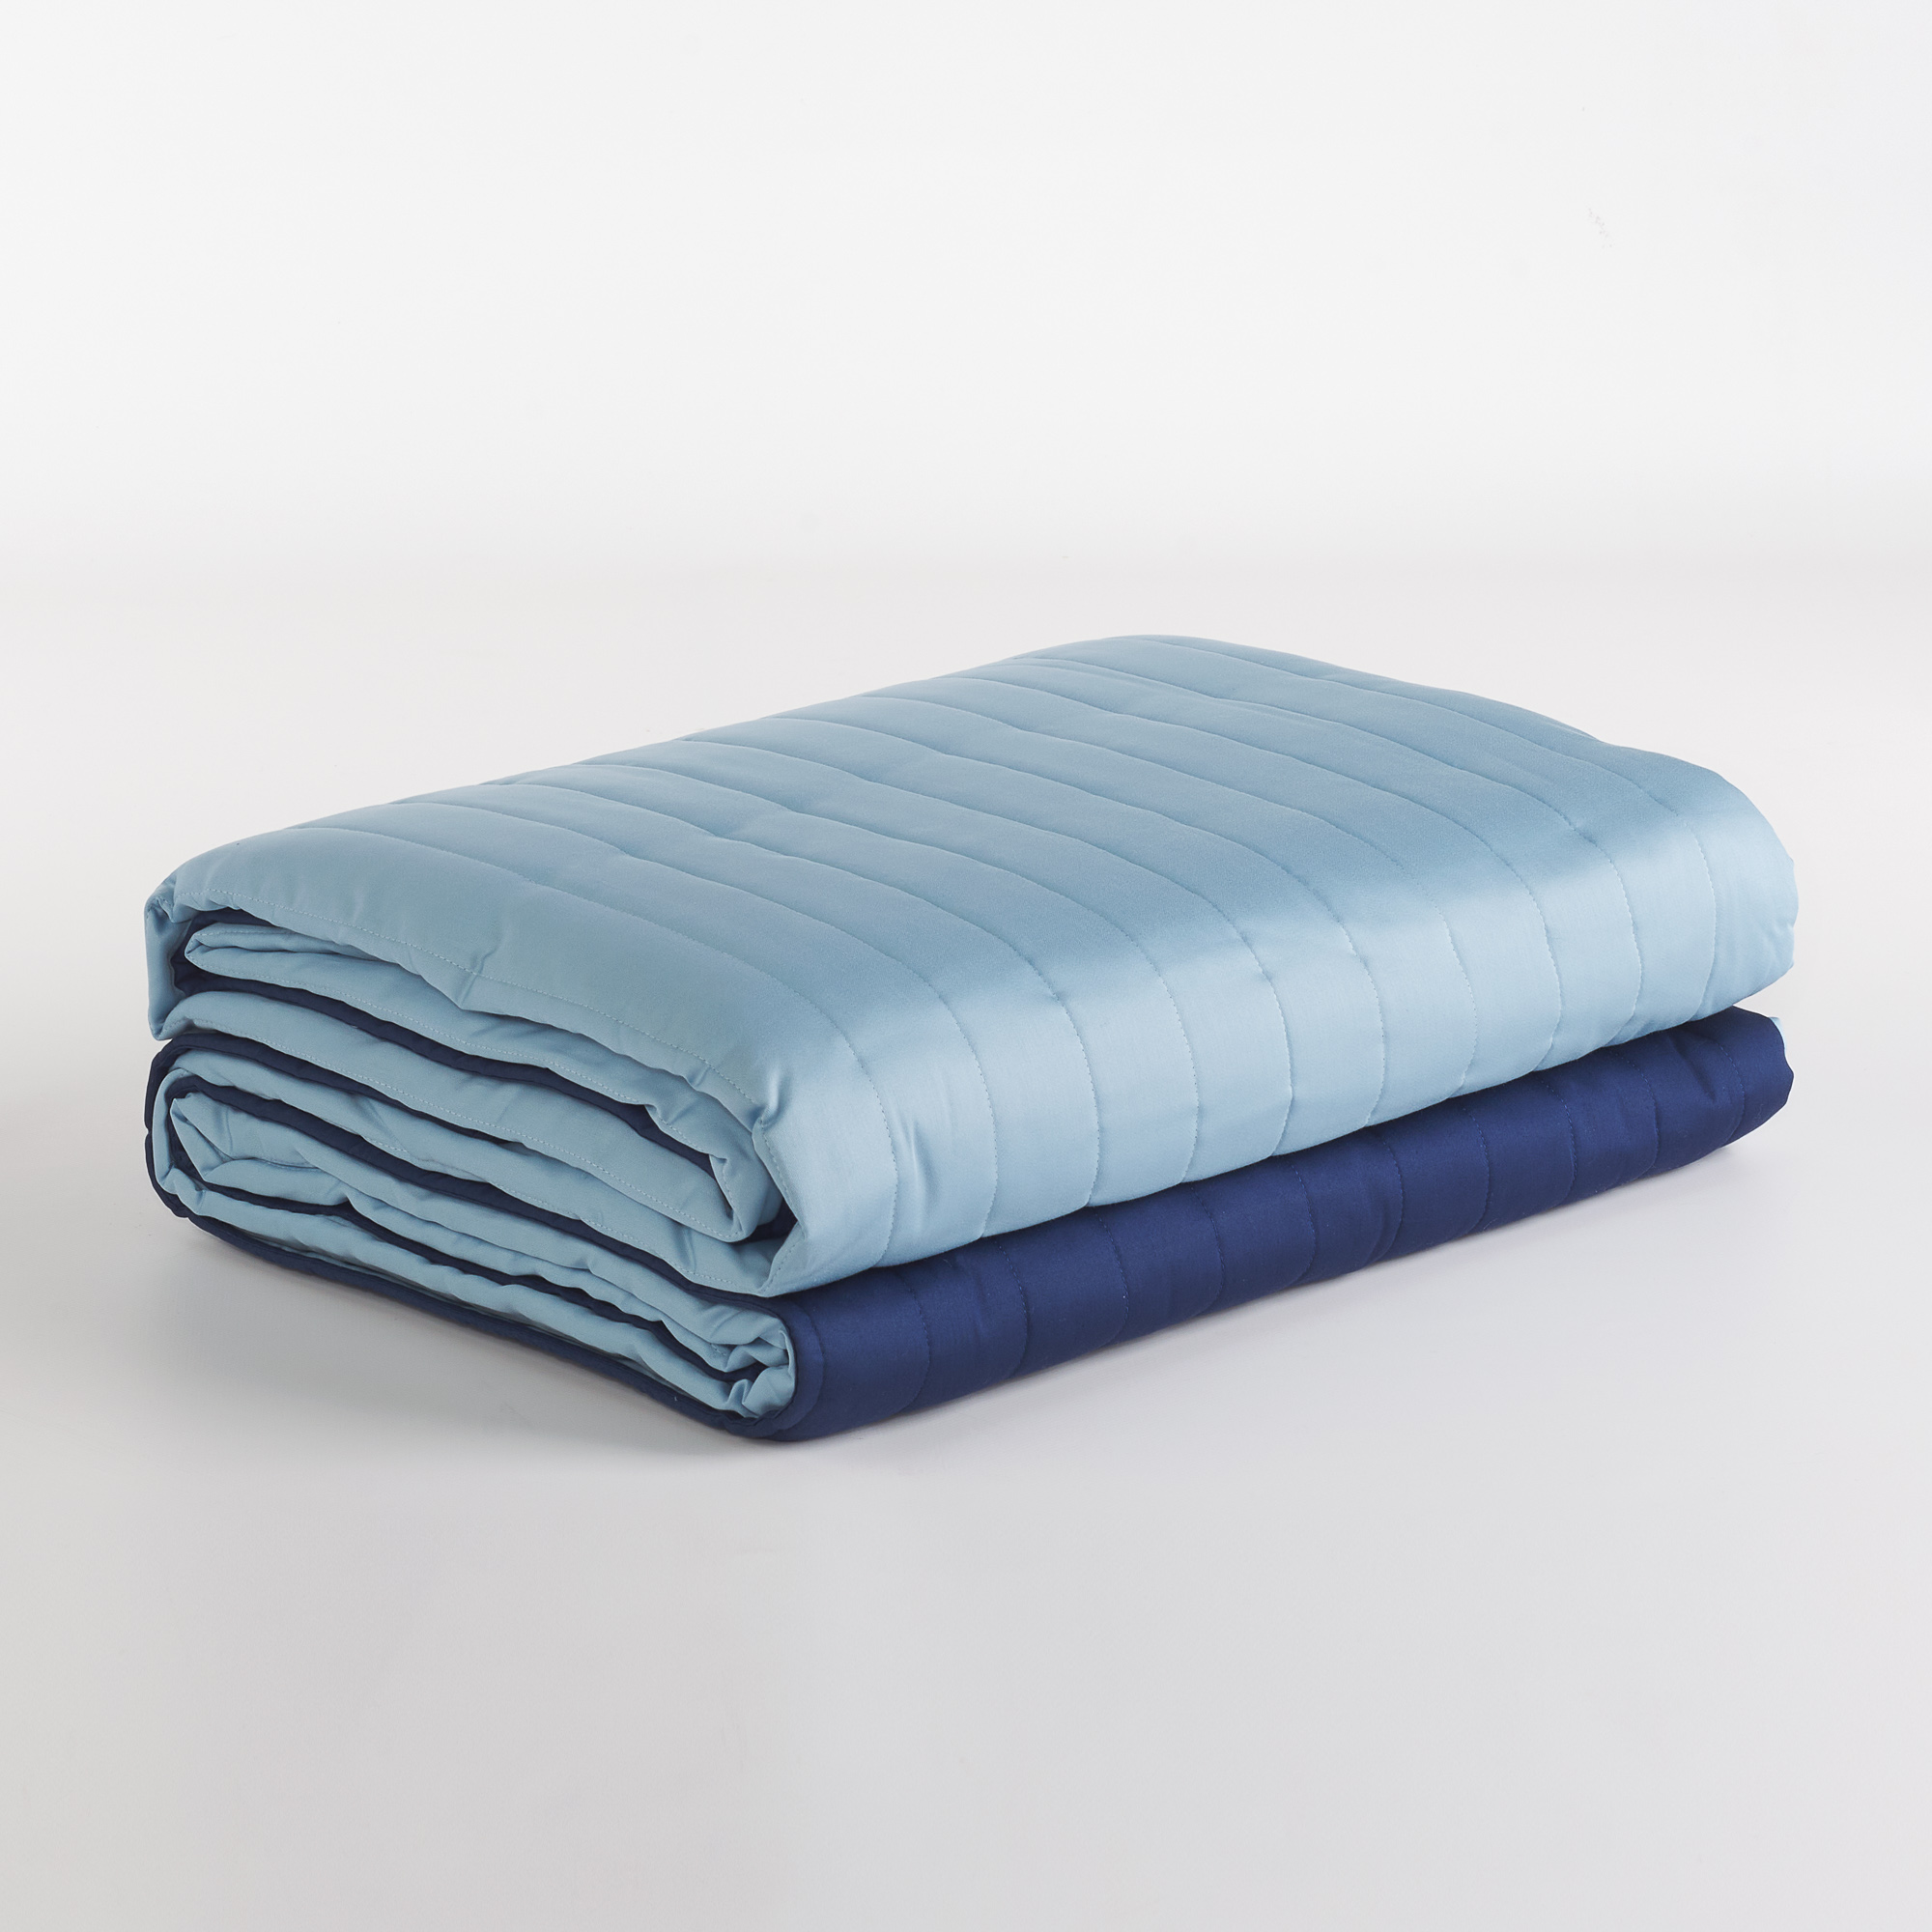 Trapuntino Quilt Double Face Antibes blu / polvere Via Roma 60